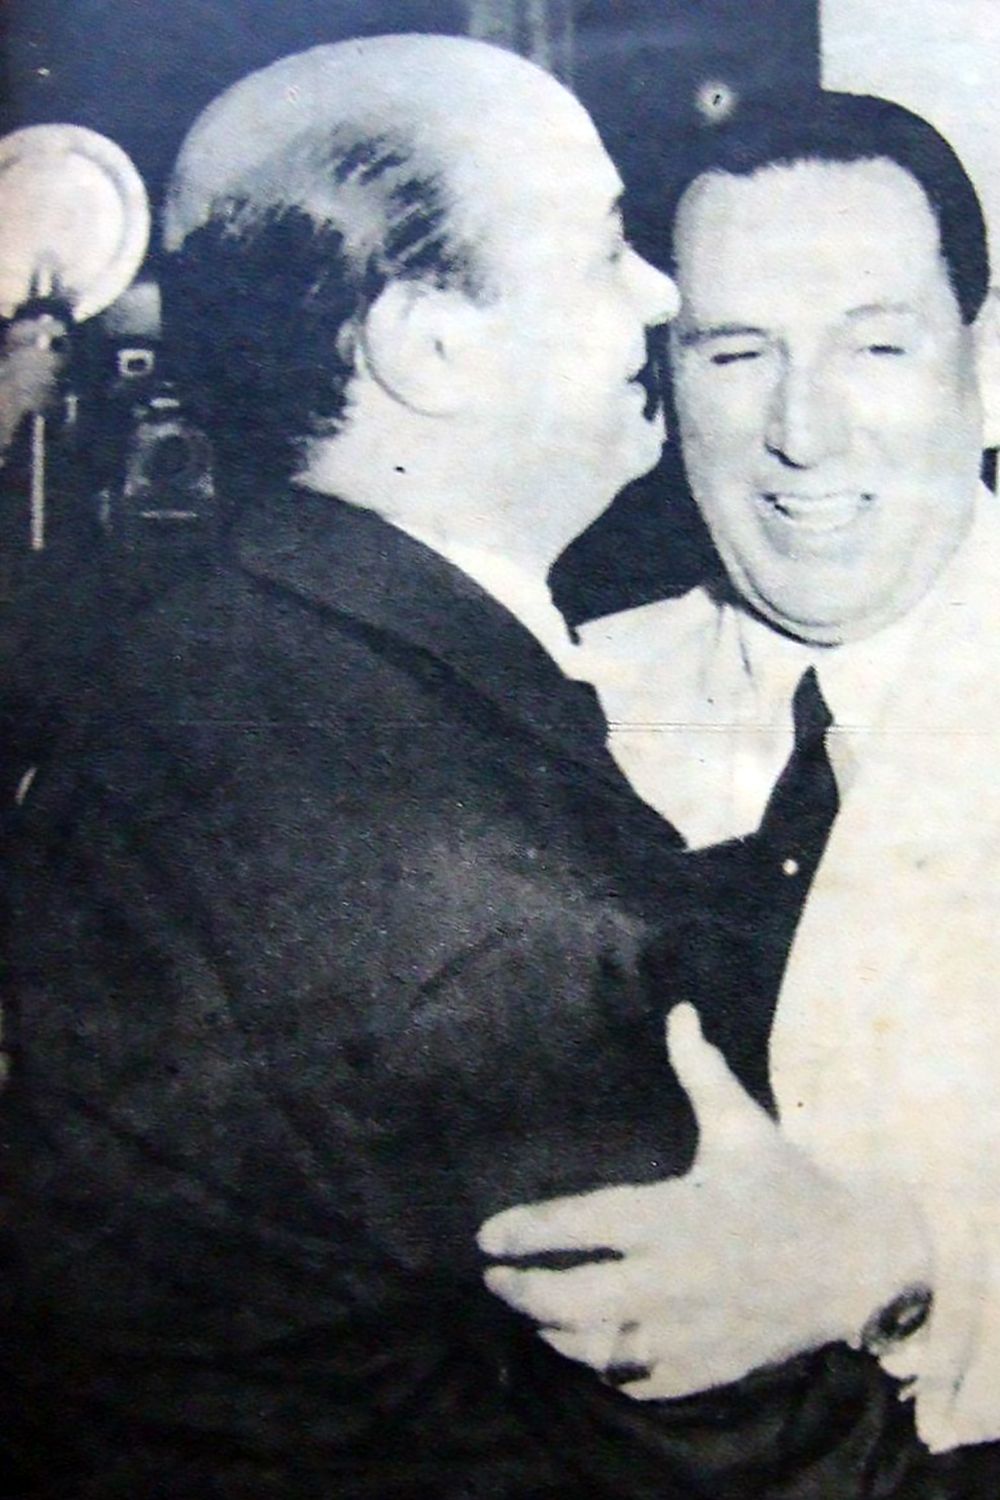 Cátulo Castillo, Argentine Tango lyricist and composer, and Perón, Argentine president.